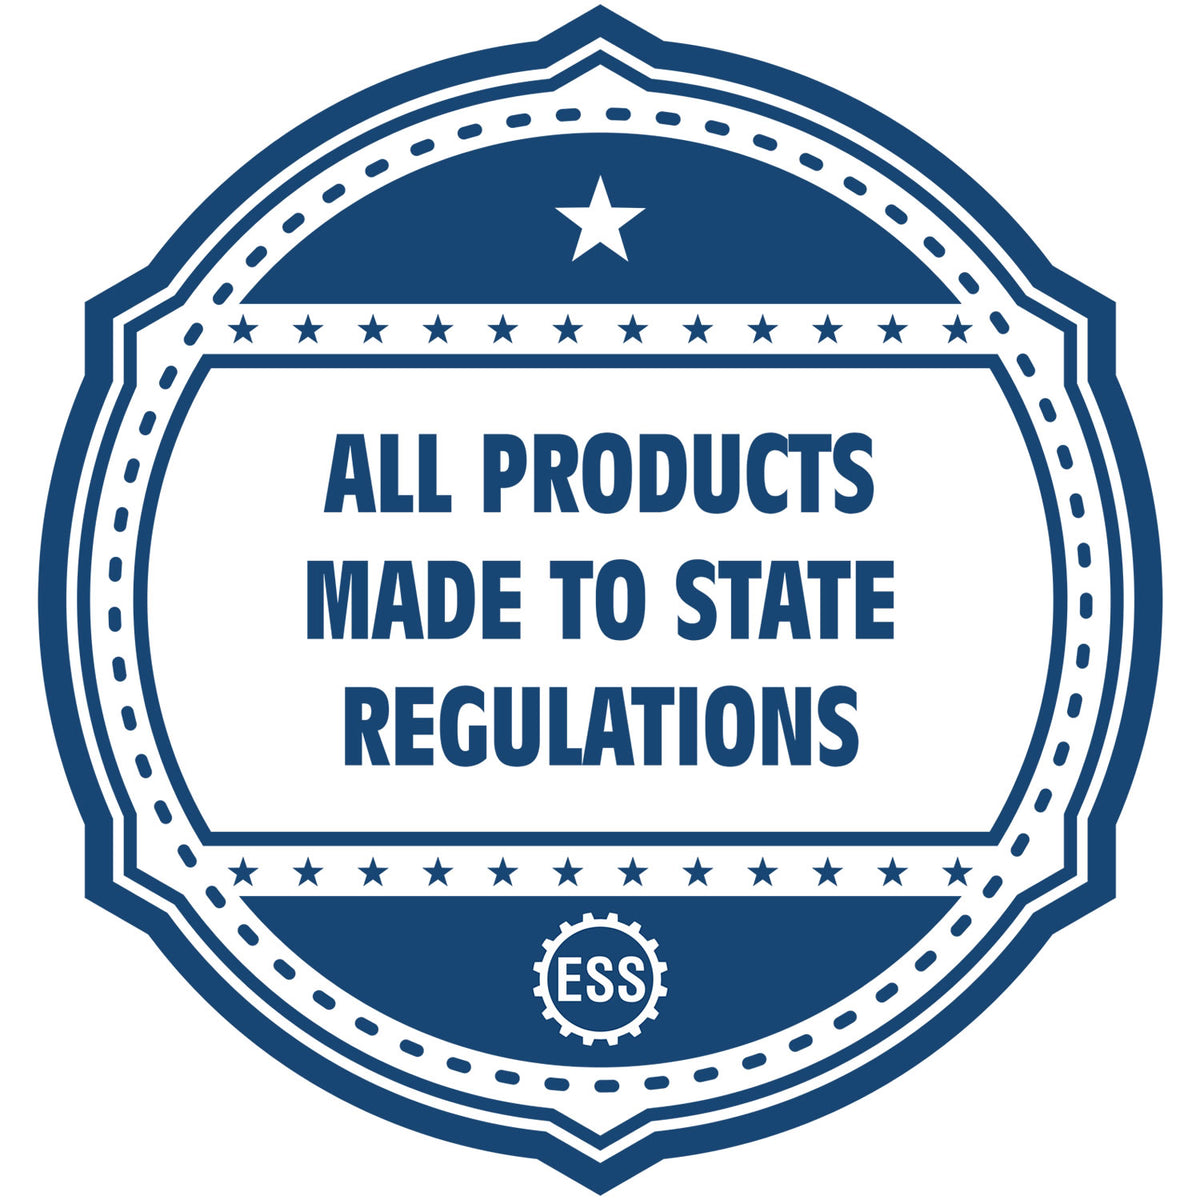 An icon or badge element for the Handheld Iowa Architect Seal Embosser showing that this product is made in compliance with state regulations.